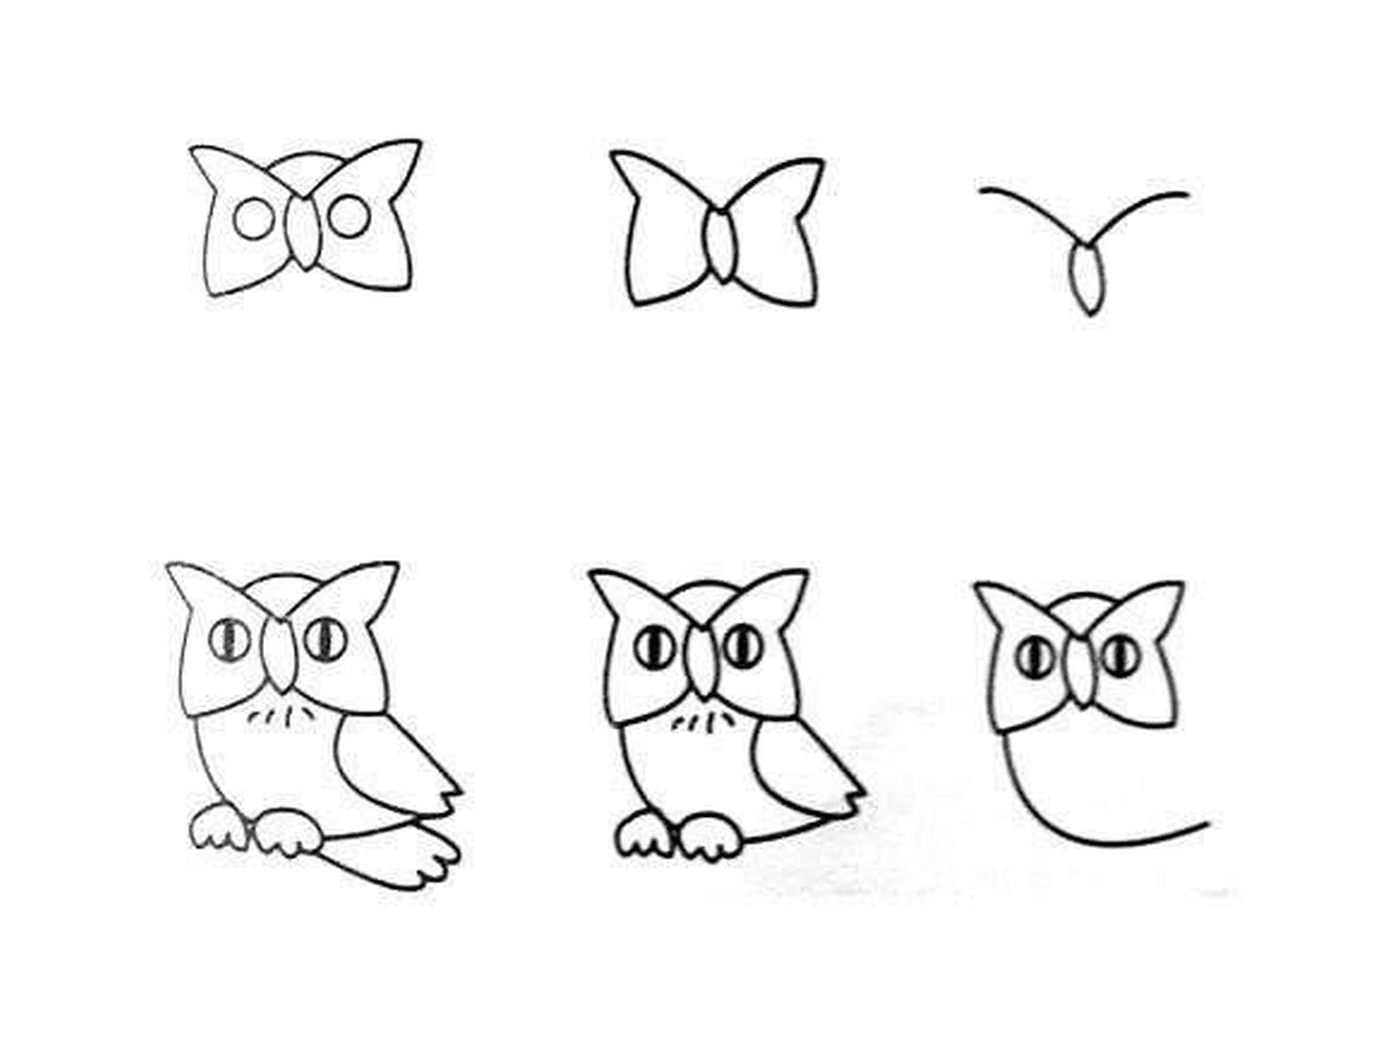  How to draw an owl easily 